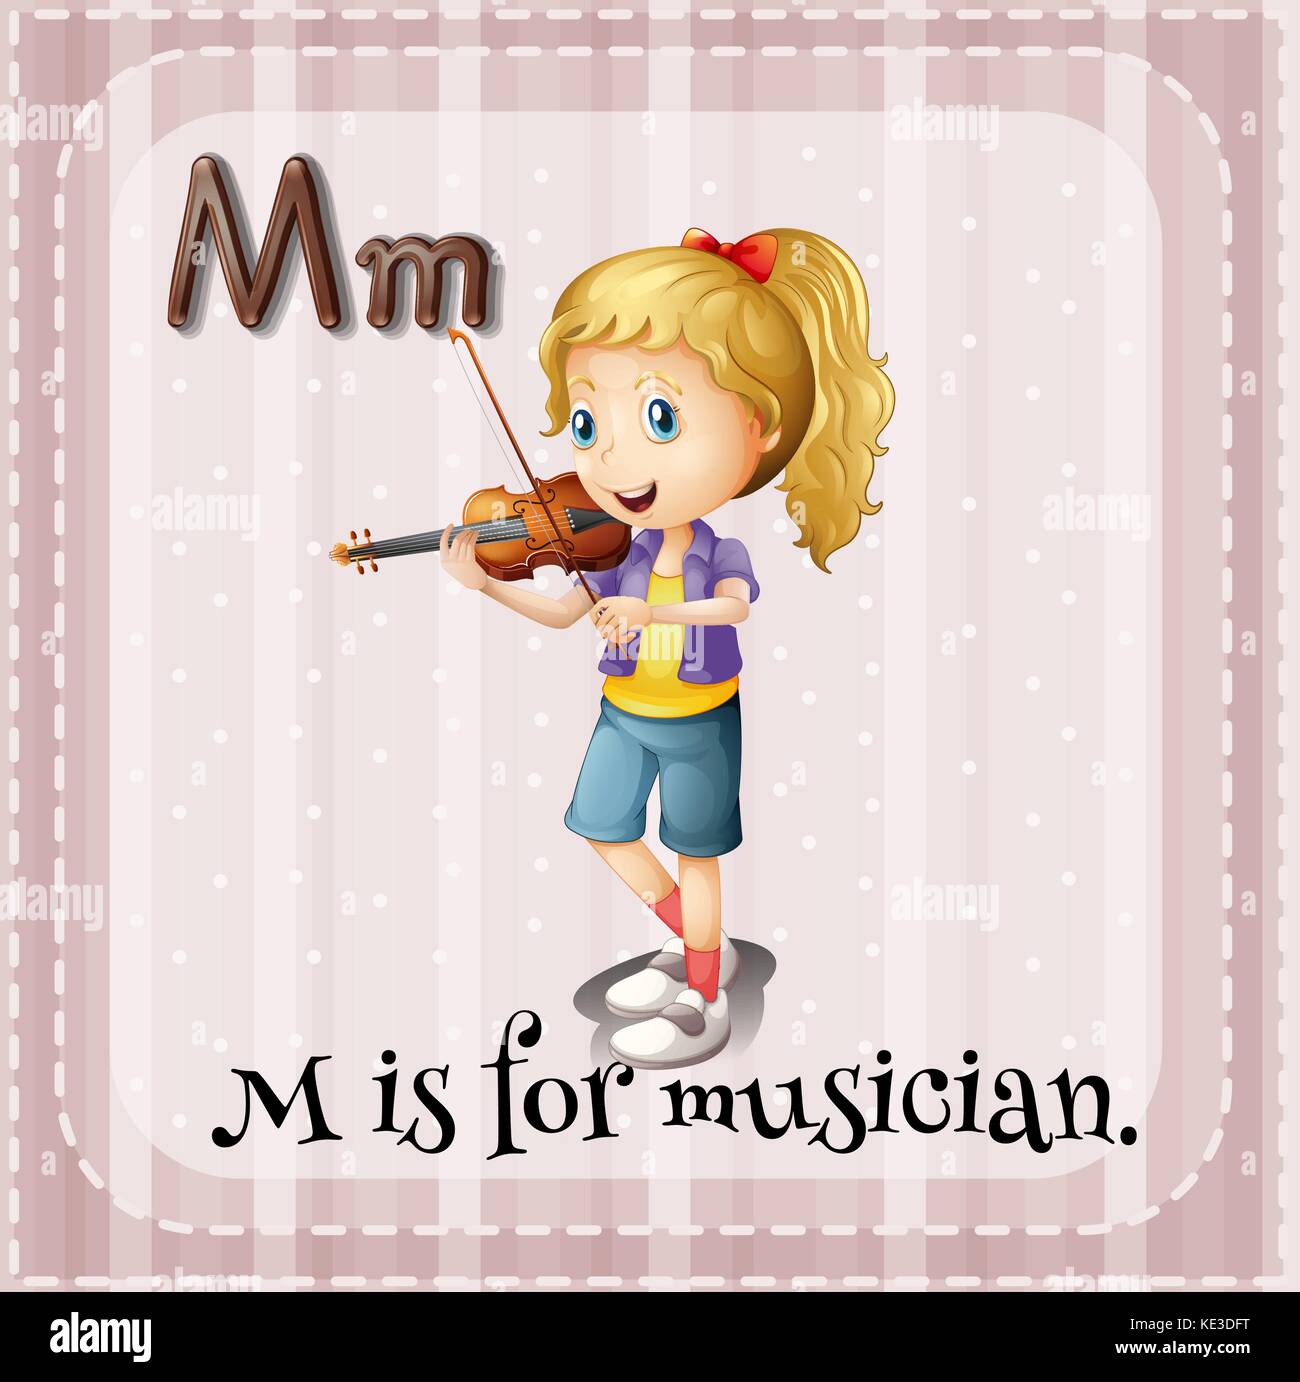 Flashcard M is for musician illustration Stock Vector